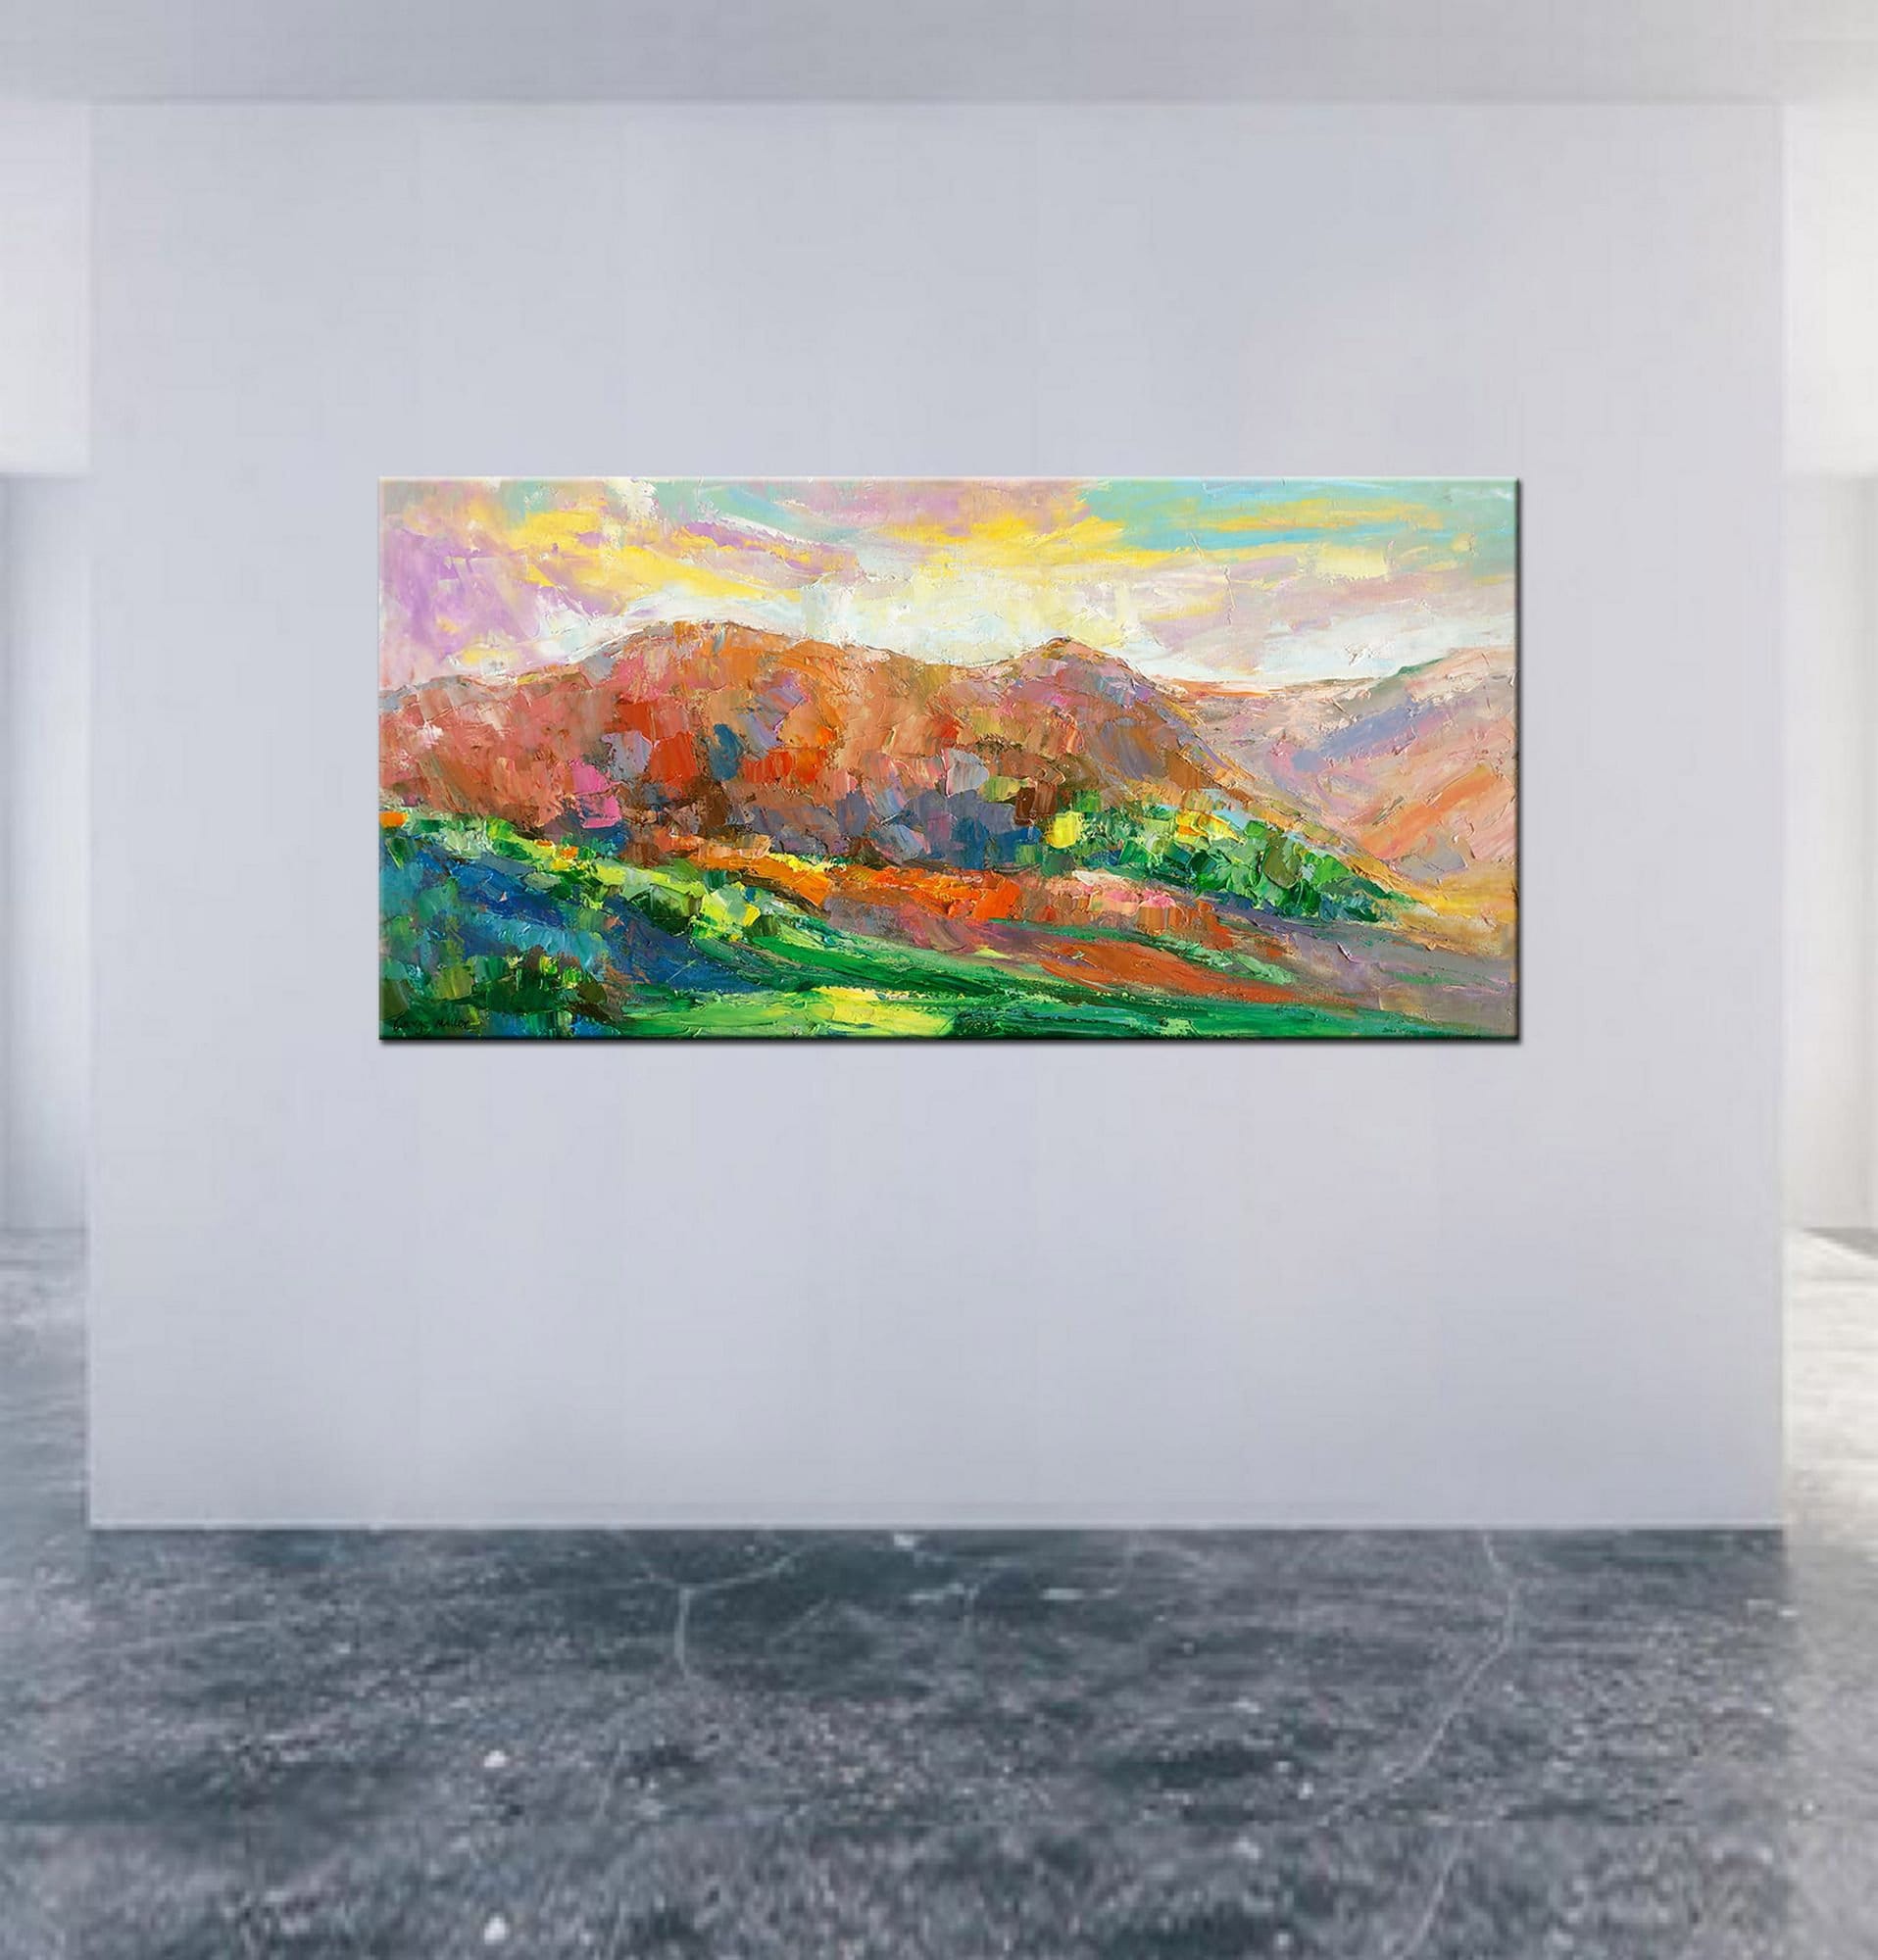 Large Landscape Canvas Painting: Abstract Art for Living Room | Ready to Hang | 24x48 inches